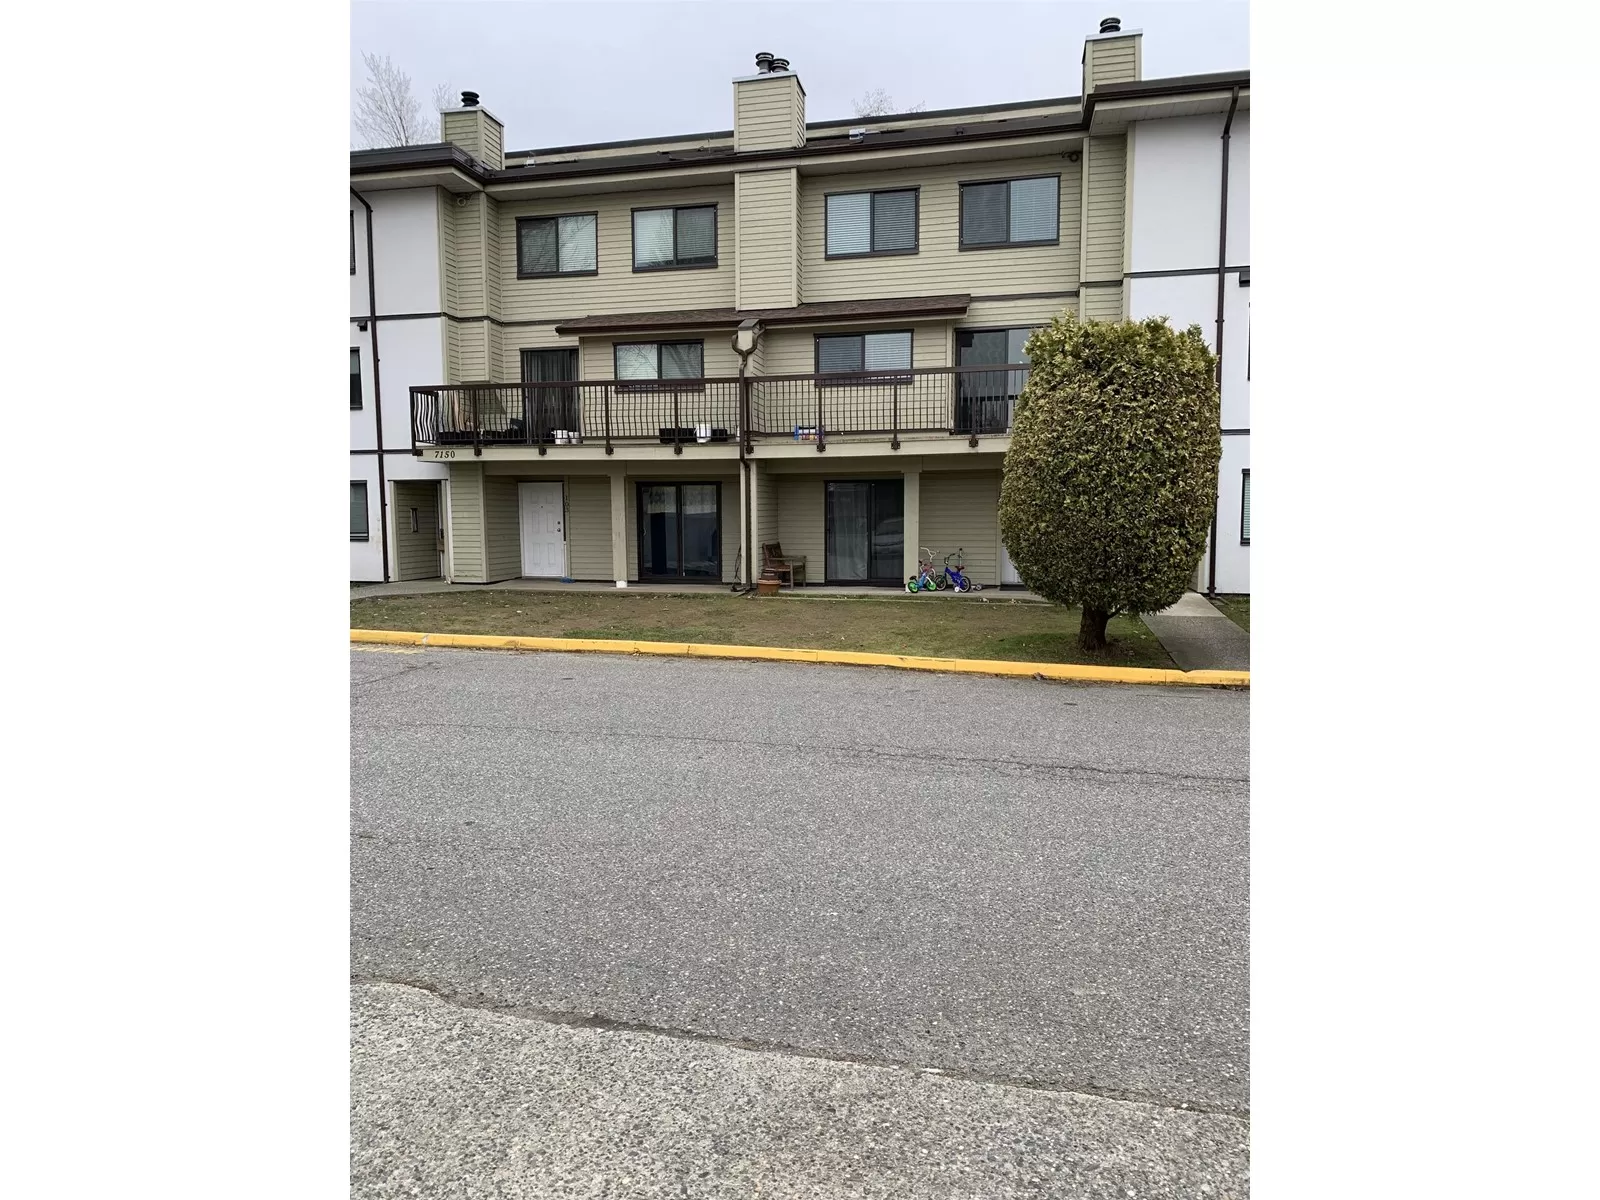 Row / Townhouse for rent: 102 7150 133 Street, Surrey, British Columbia V3W 7Z7